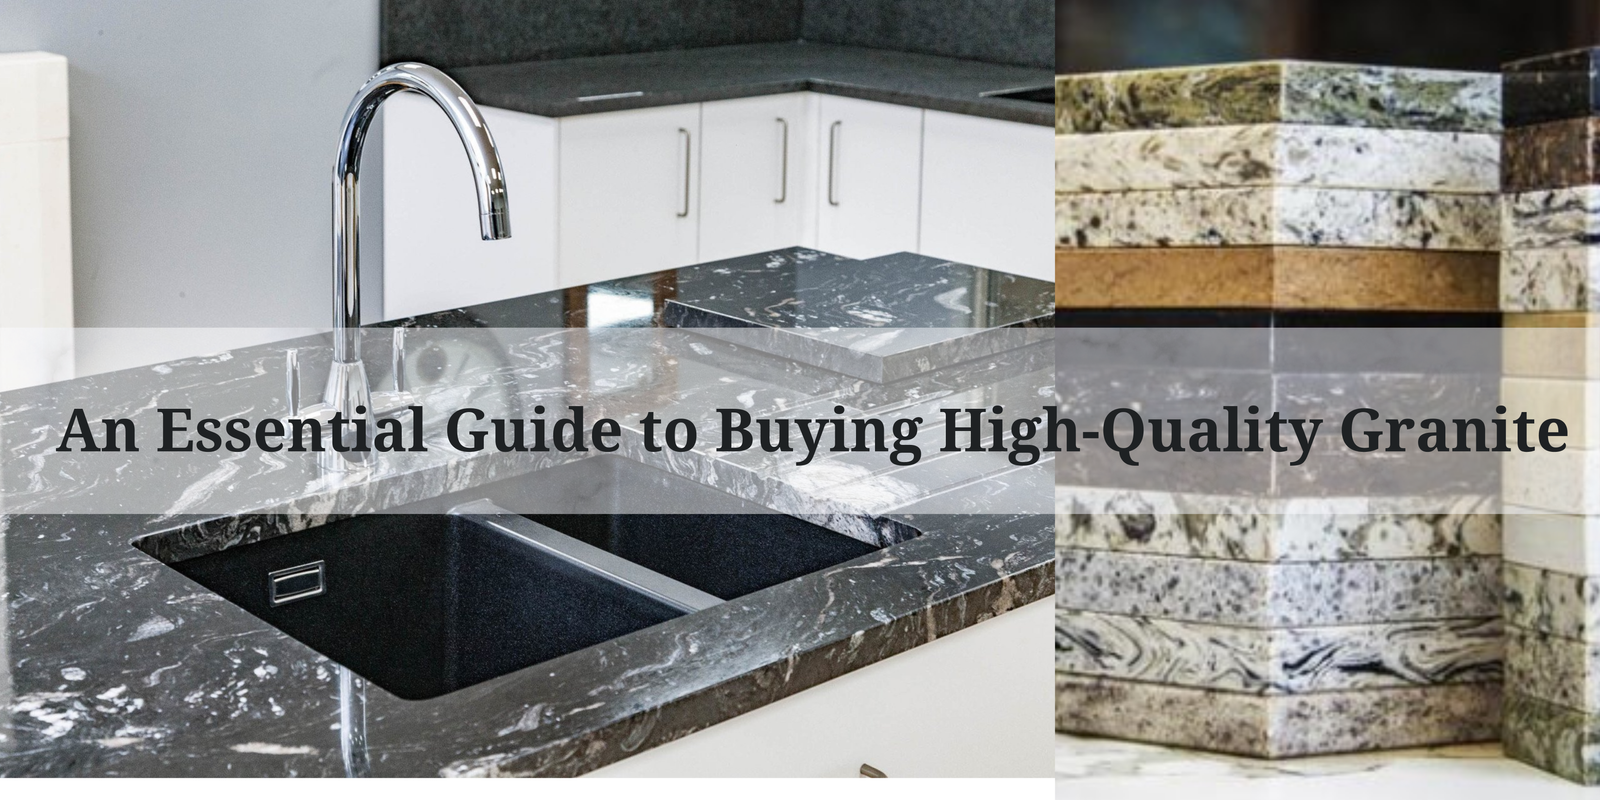 An Essential Guide to Buying High-Quality Granite